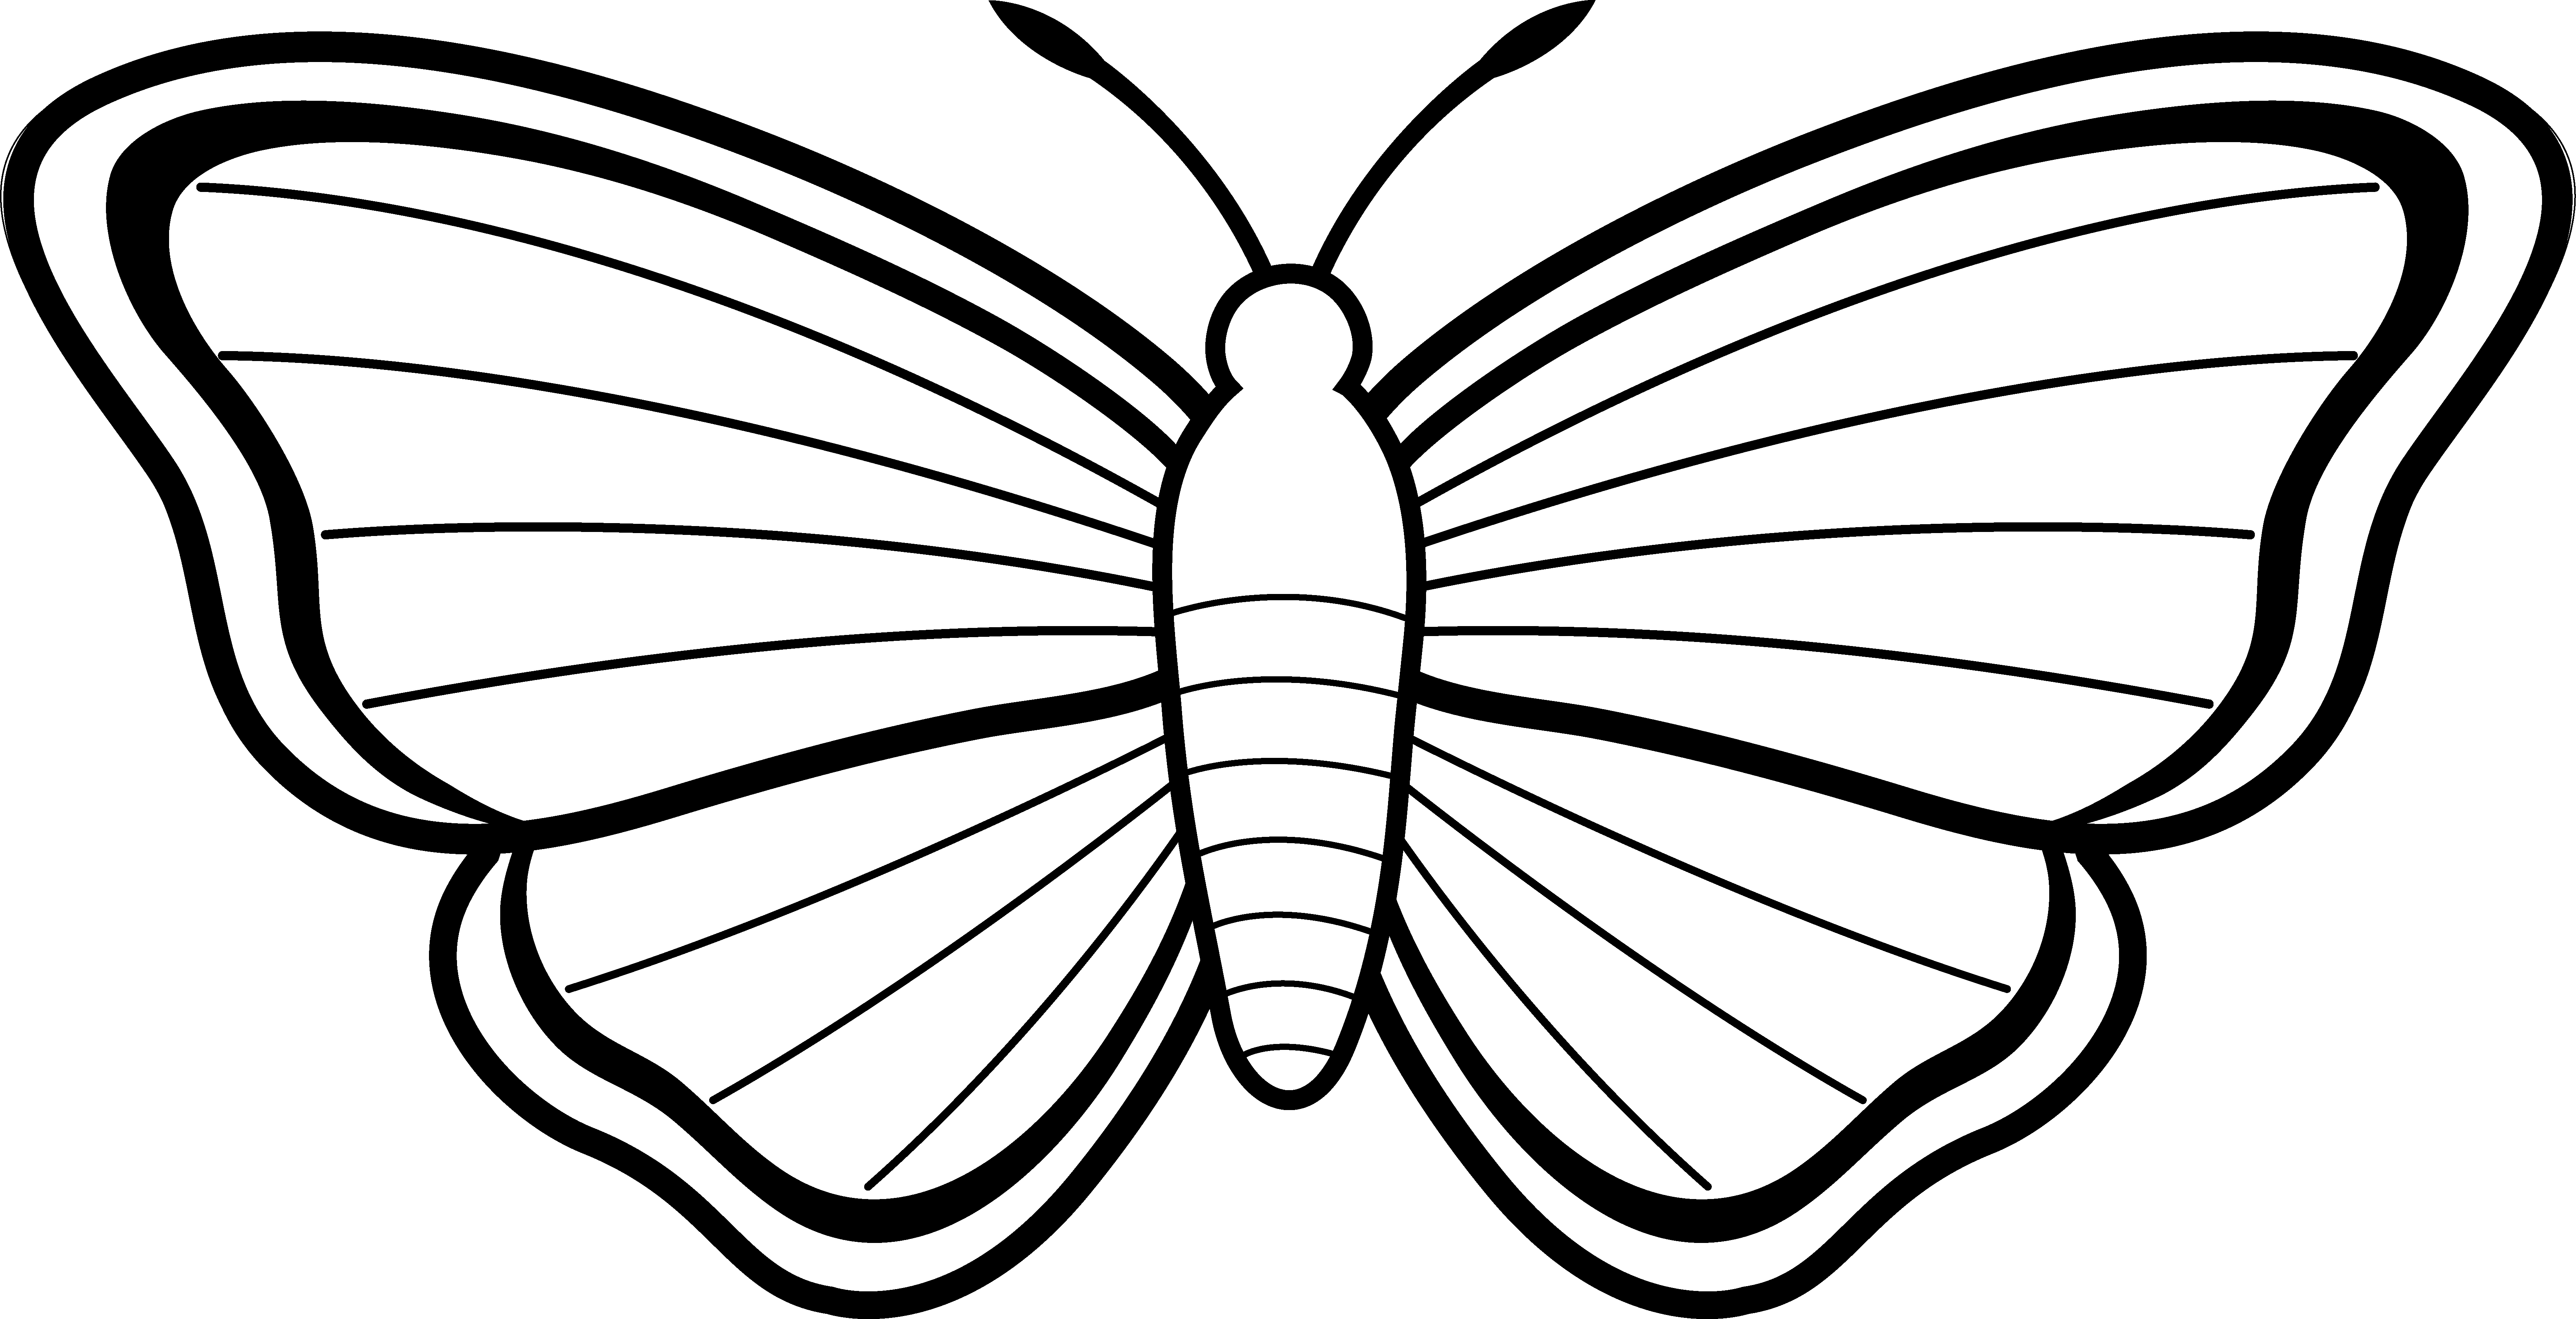 Butterfly outline panda free. Clipart computer coloring